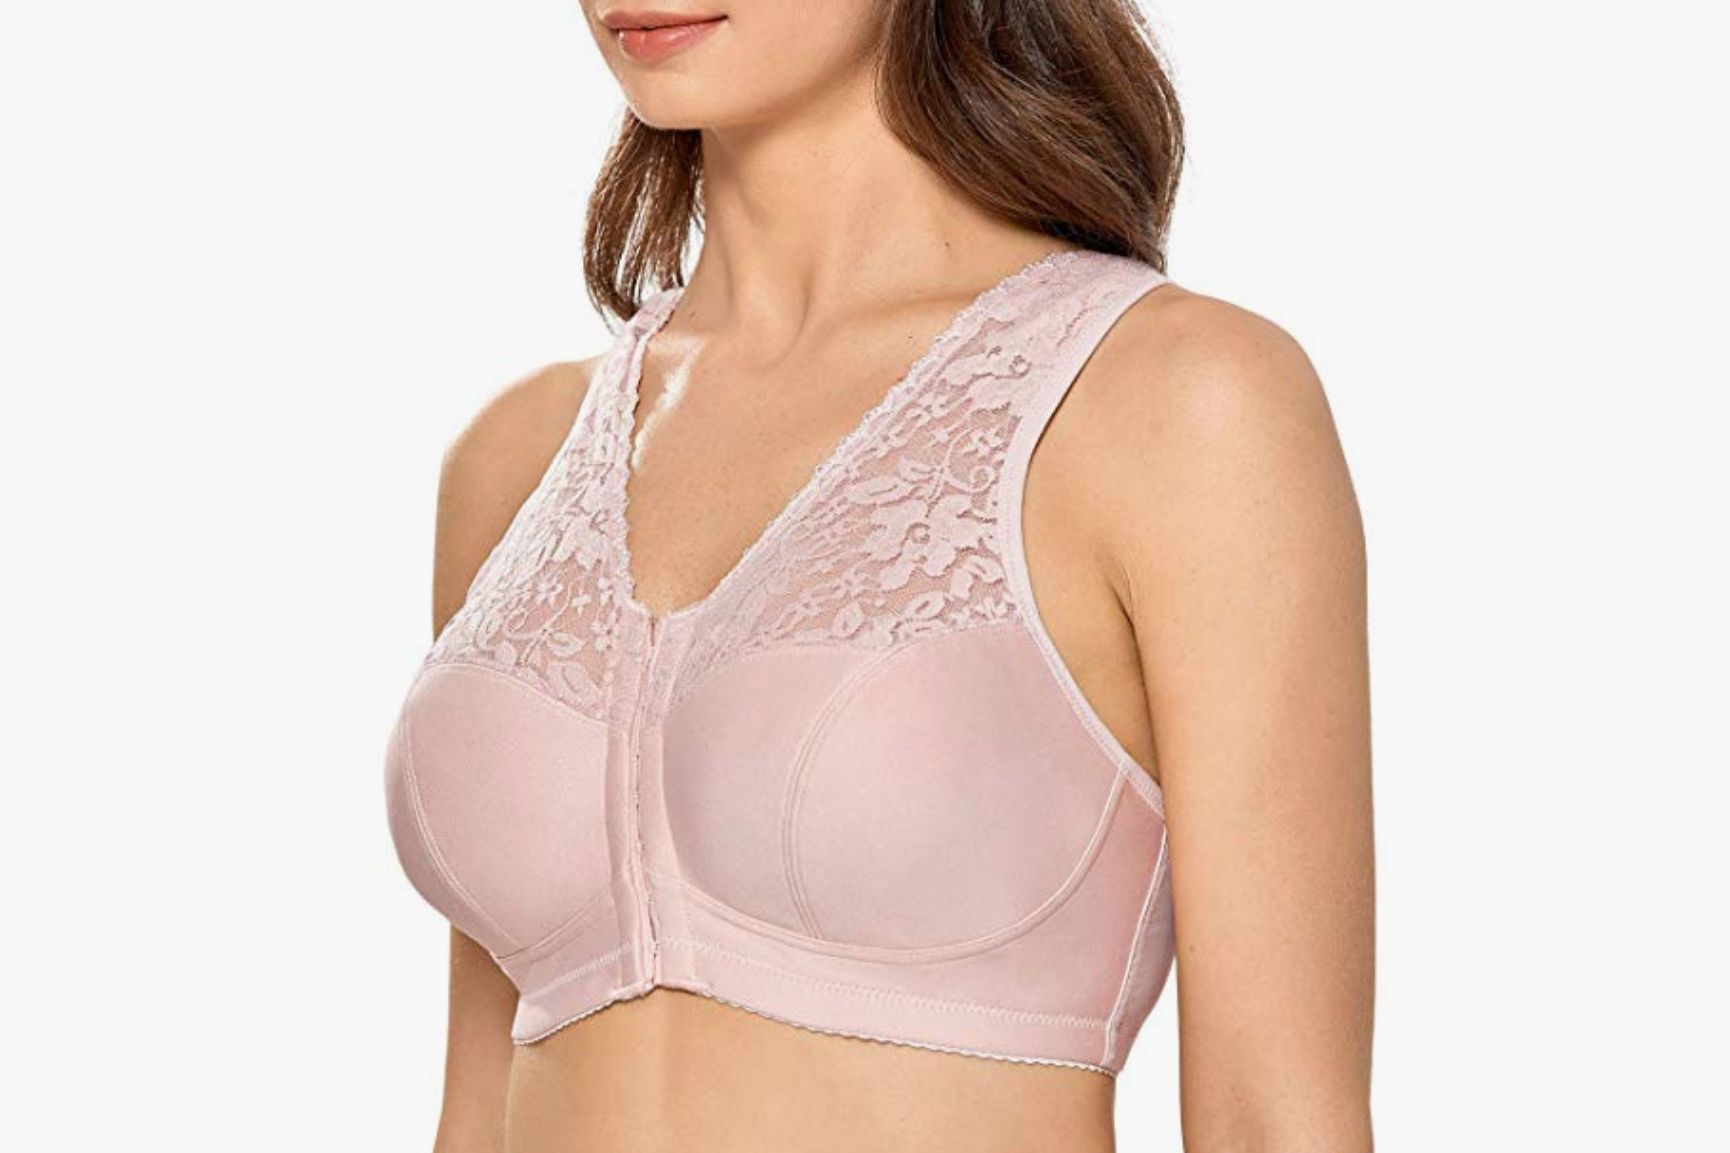 Best Heavy Breast Bra for Big Bust Lift & Side Support 